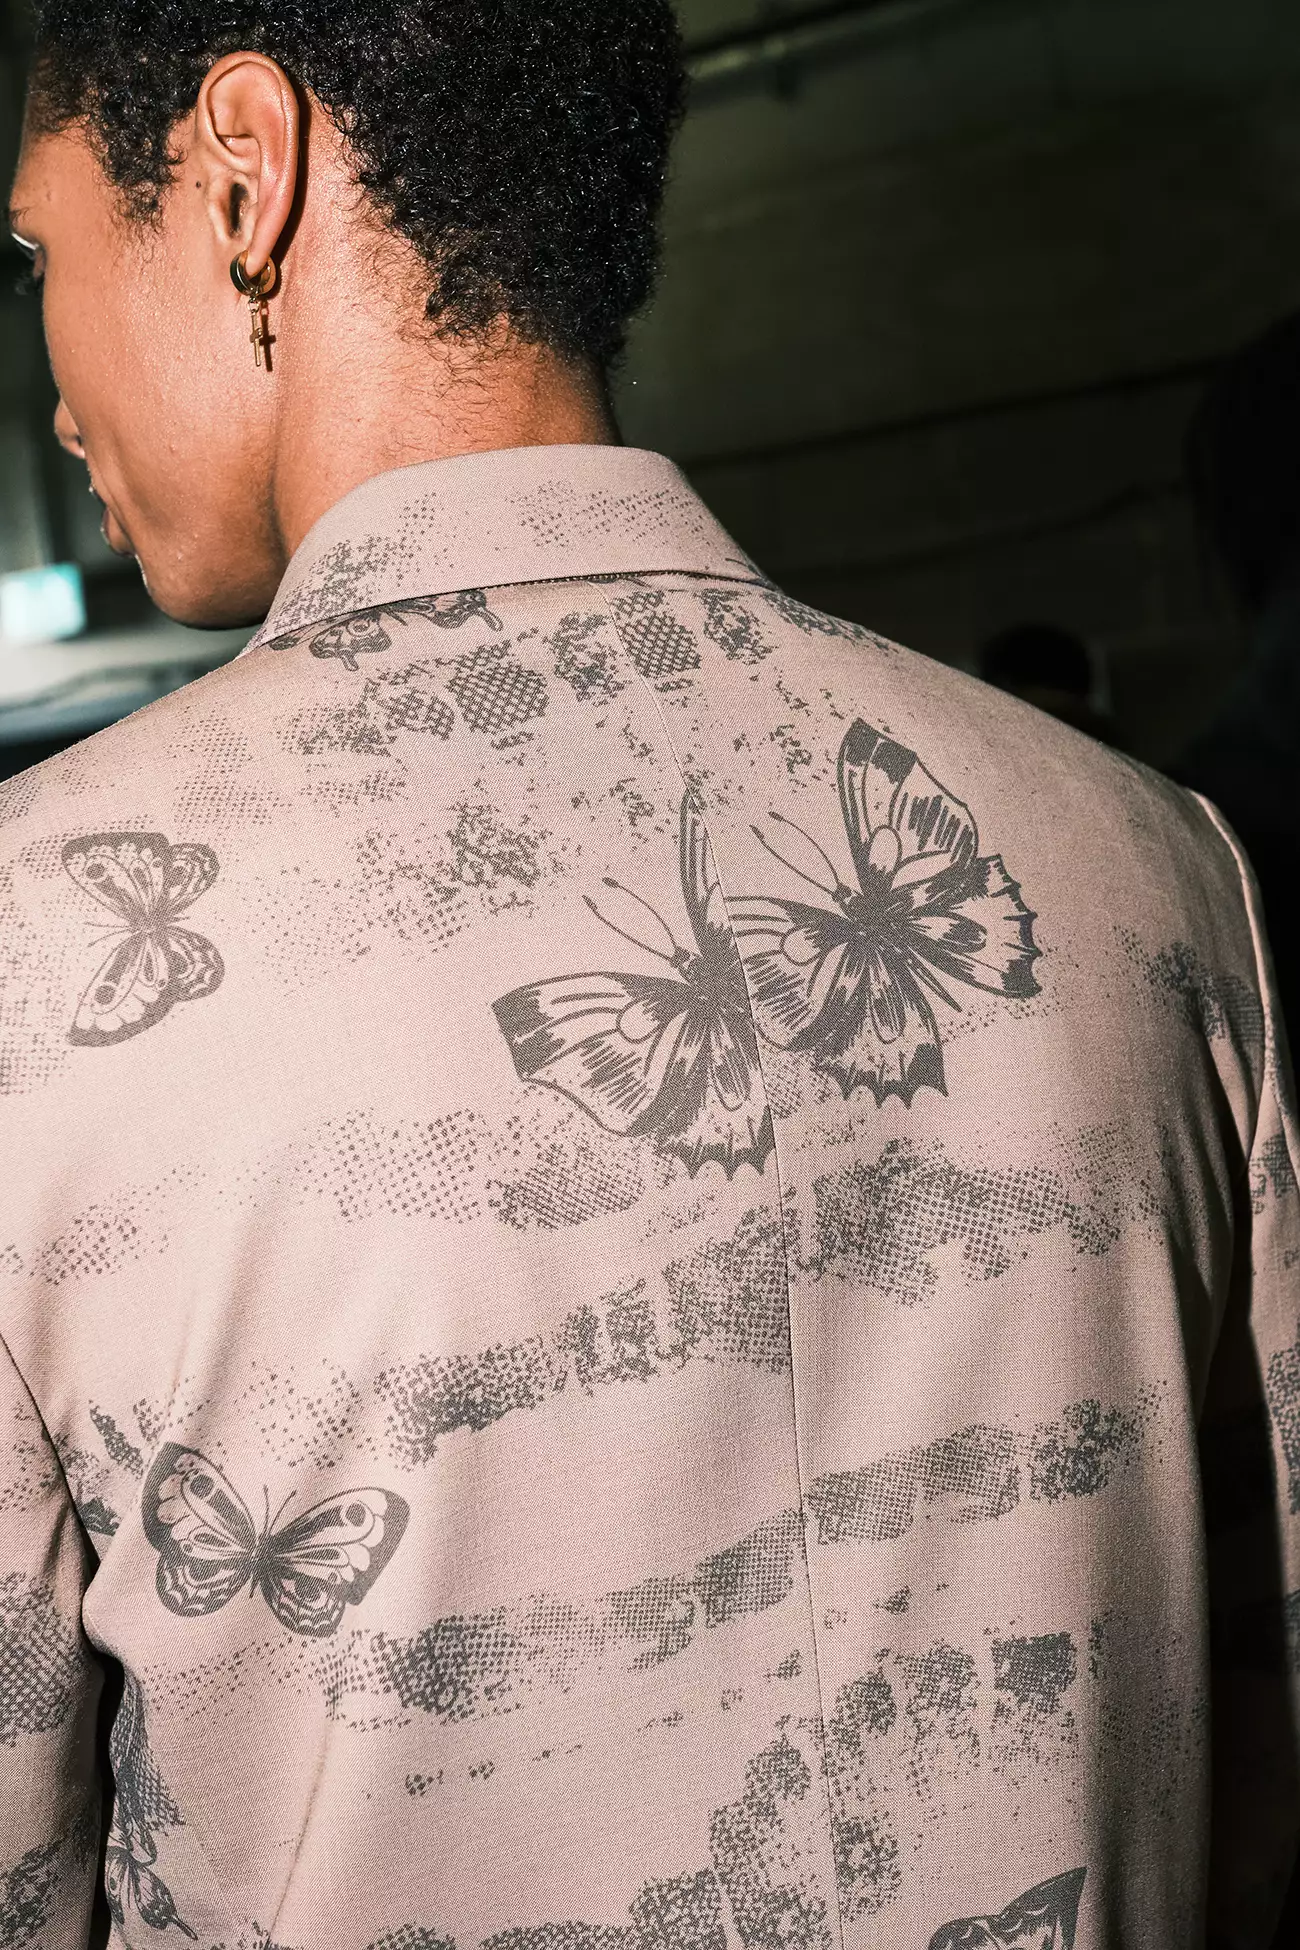 Metamorphosis: The rise of Reece Yeboah & COS collaboration